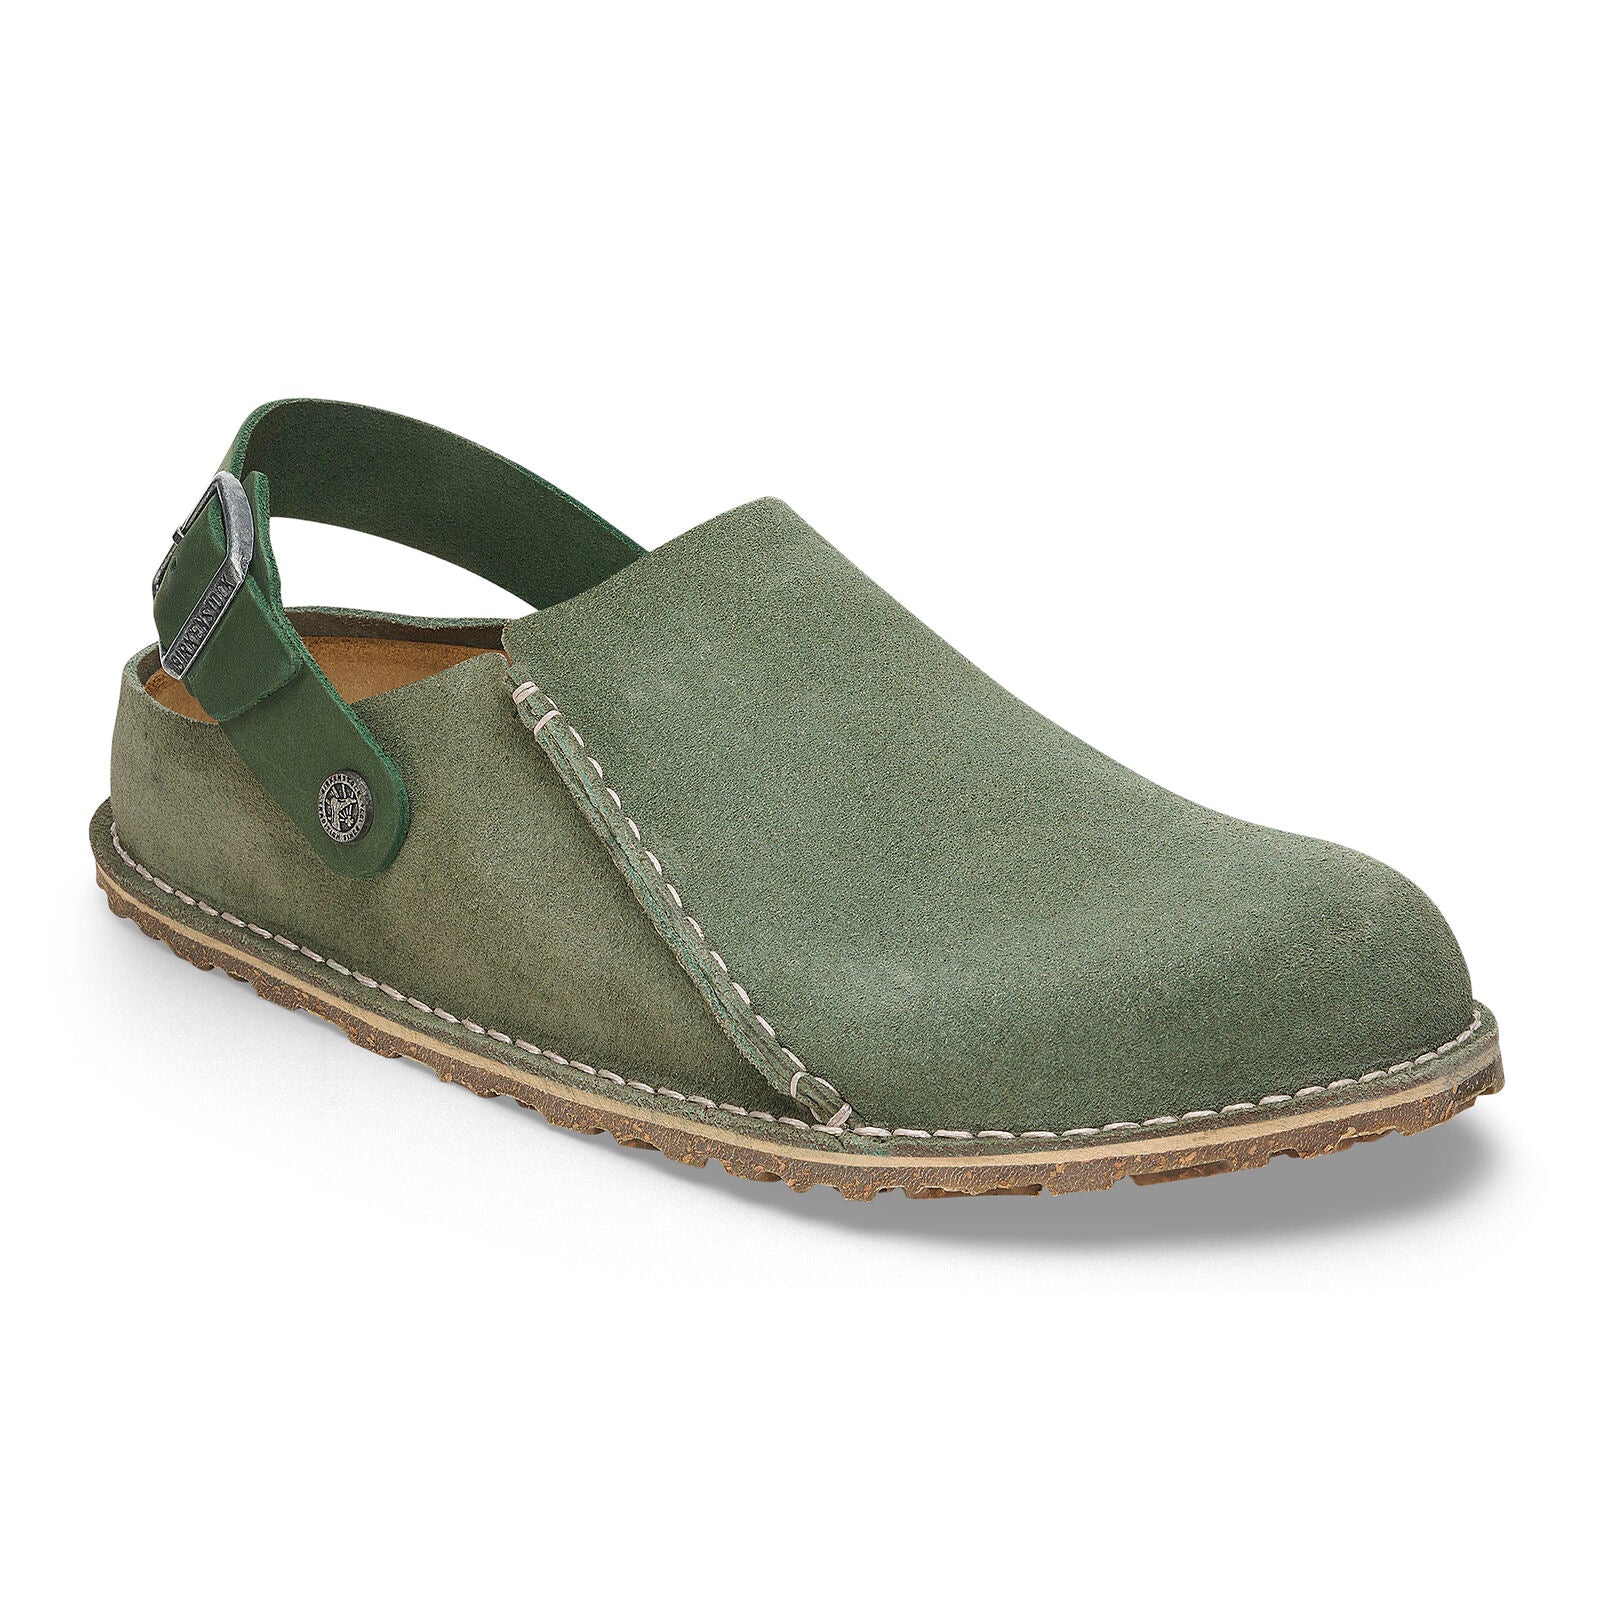 Birkenstock Limited Edition Lutry thyme suede